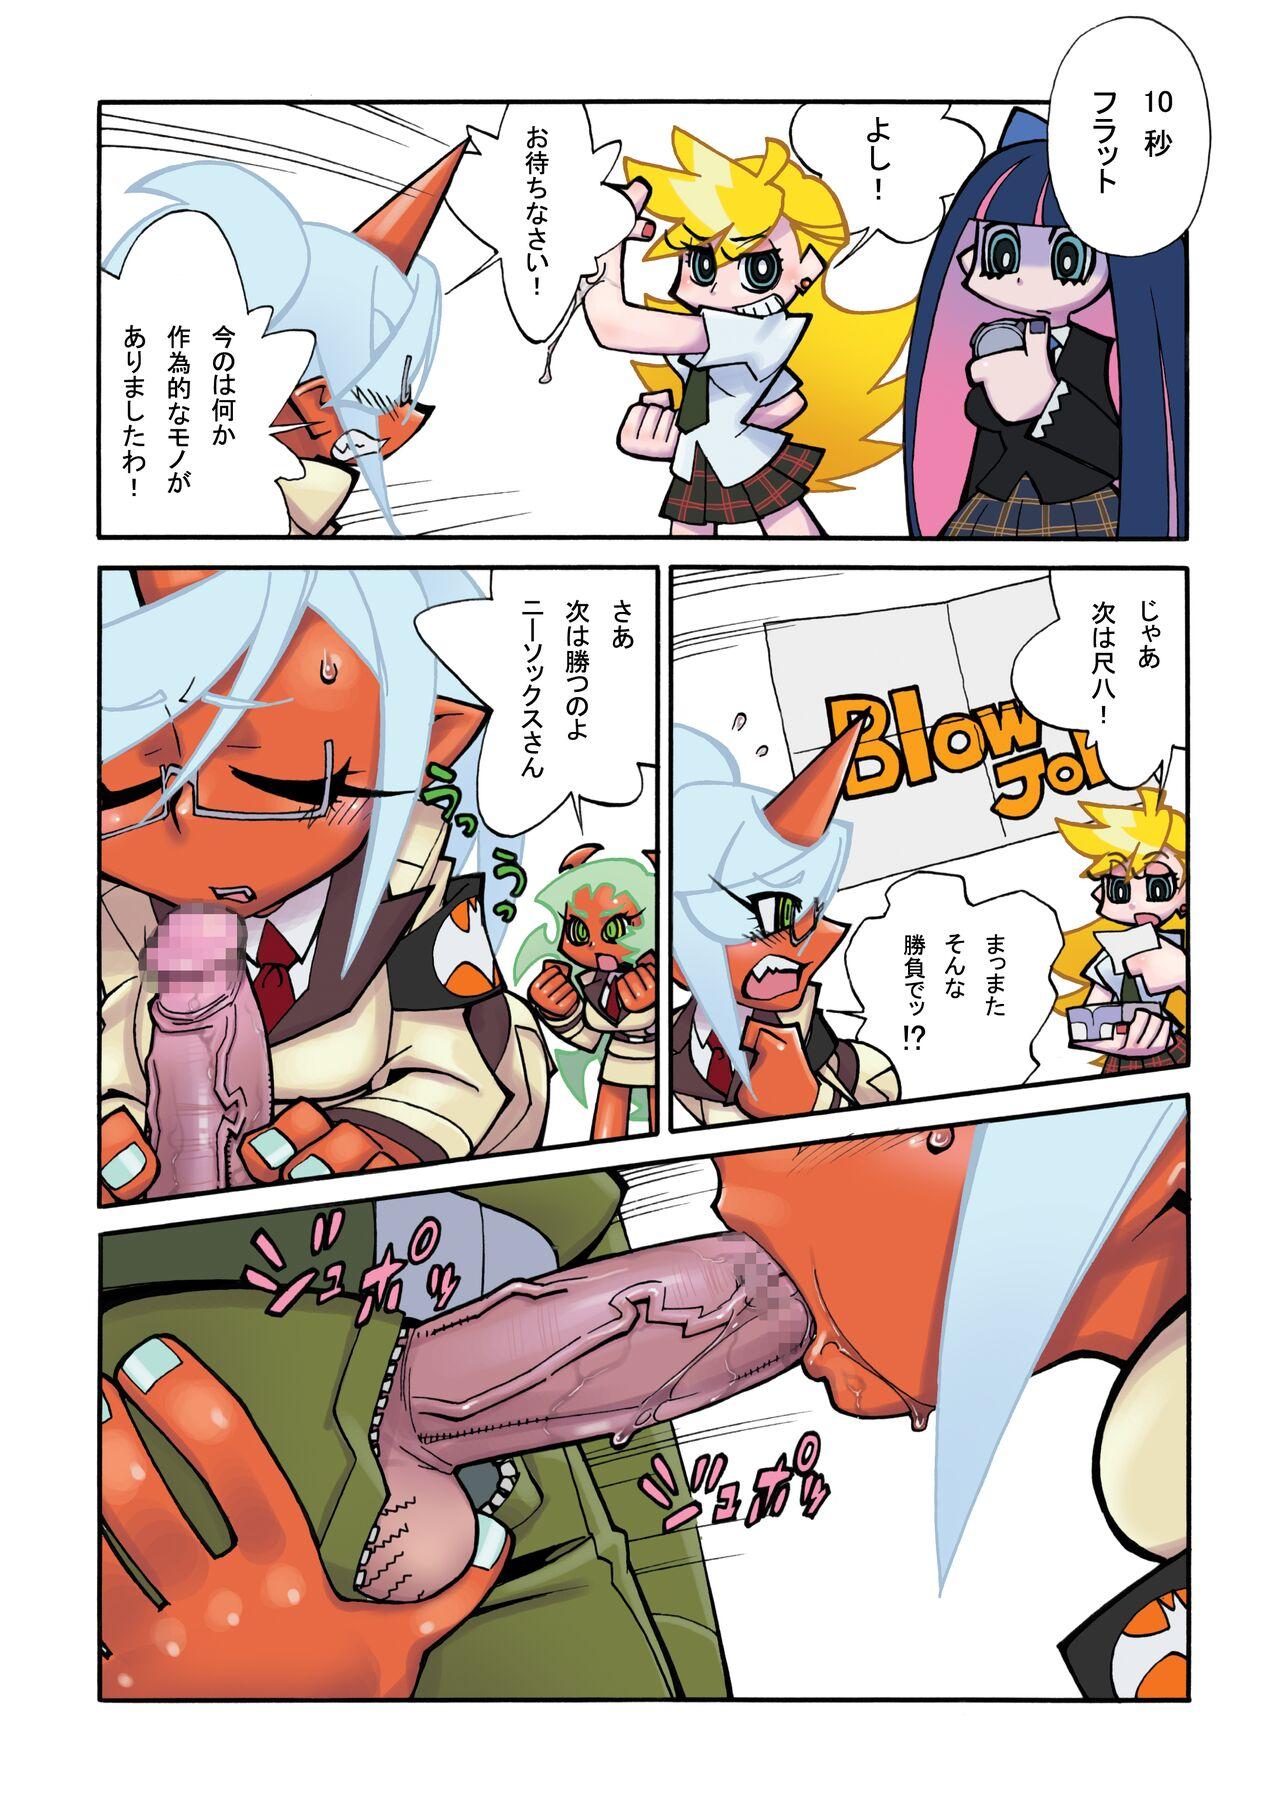 Reality PT&NS - Panty and stocking with garterbelt Fodendo - Page 6